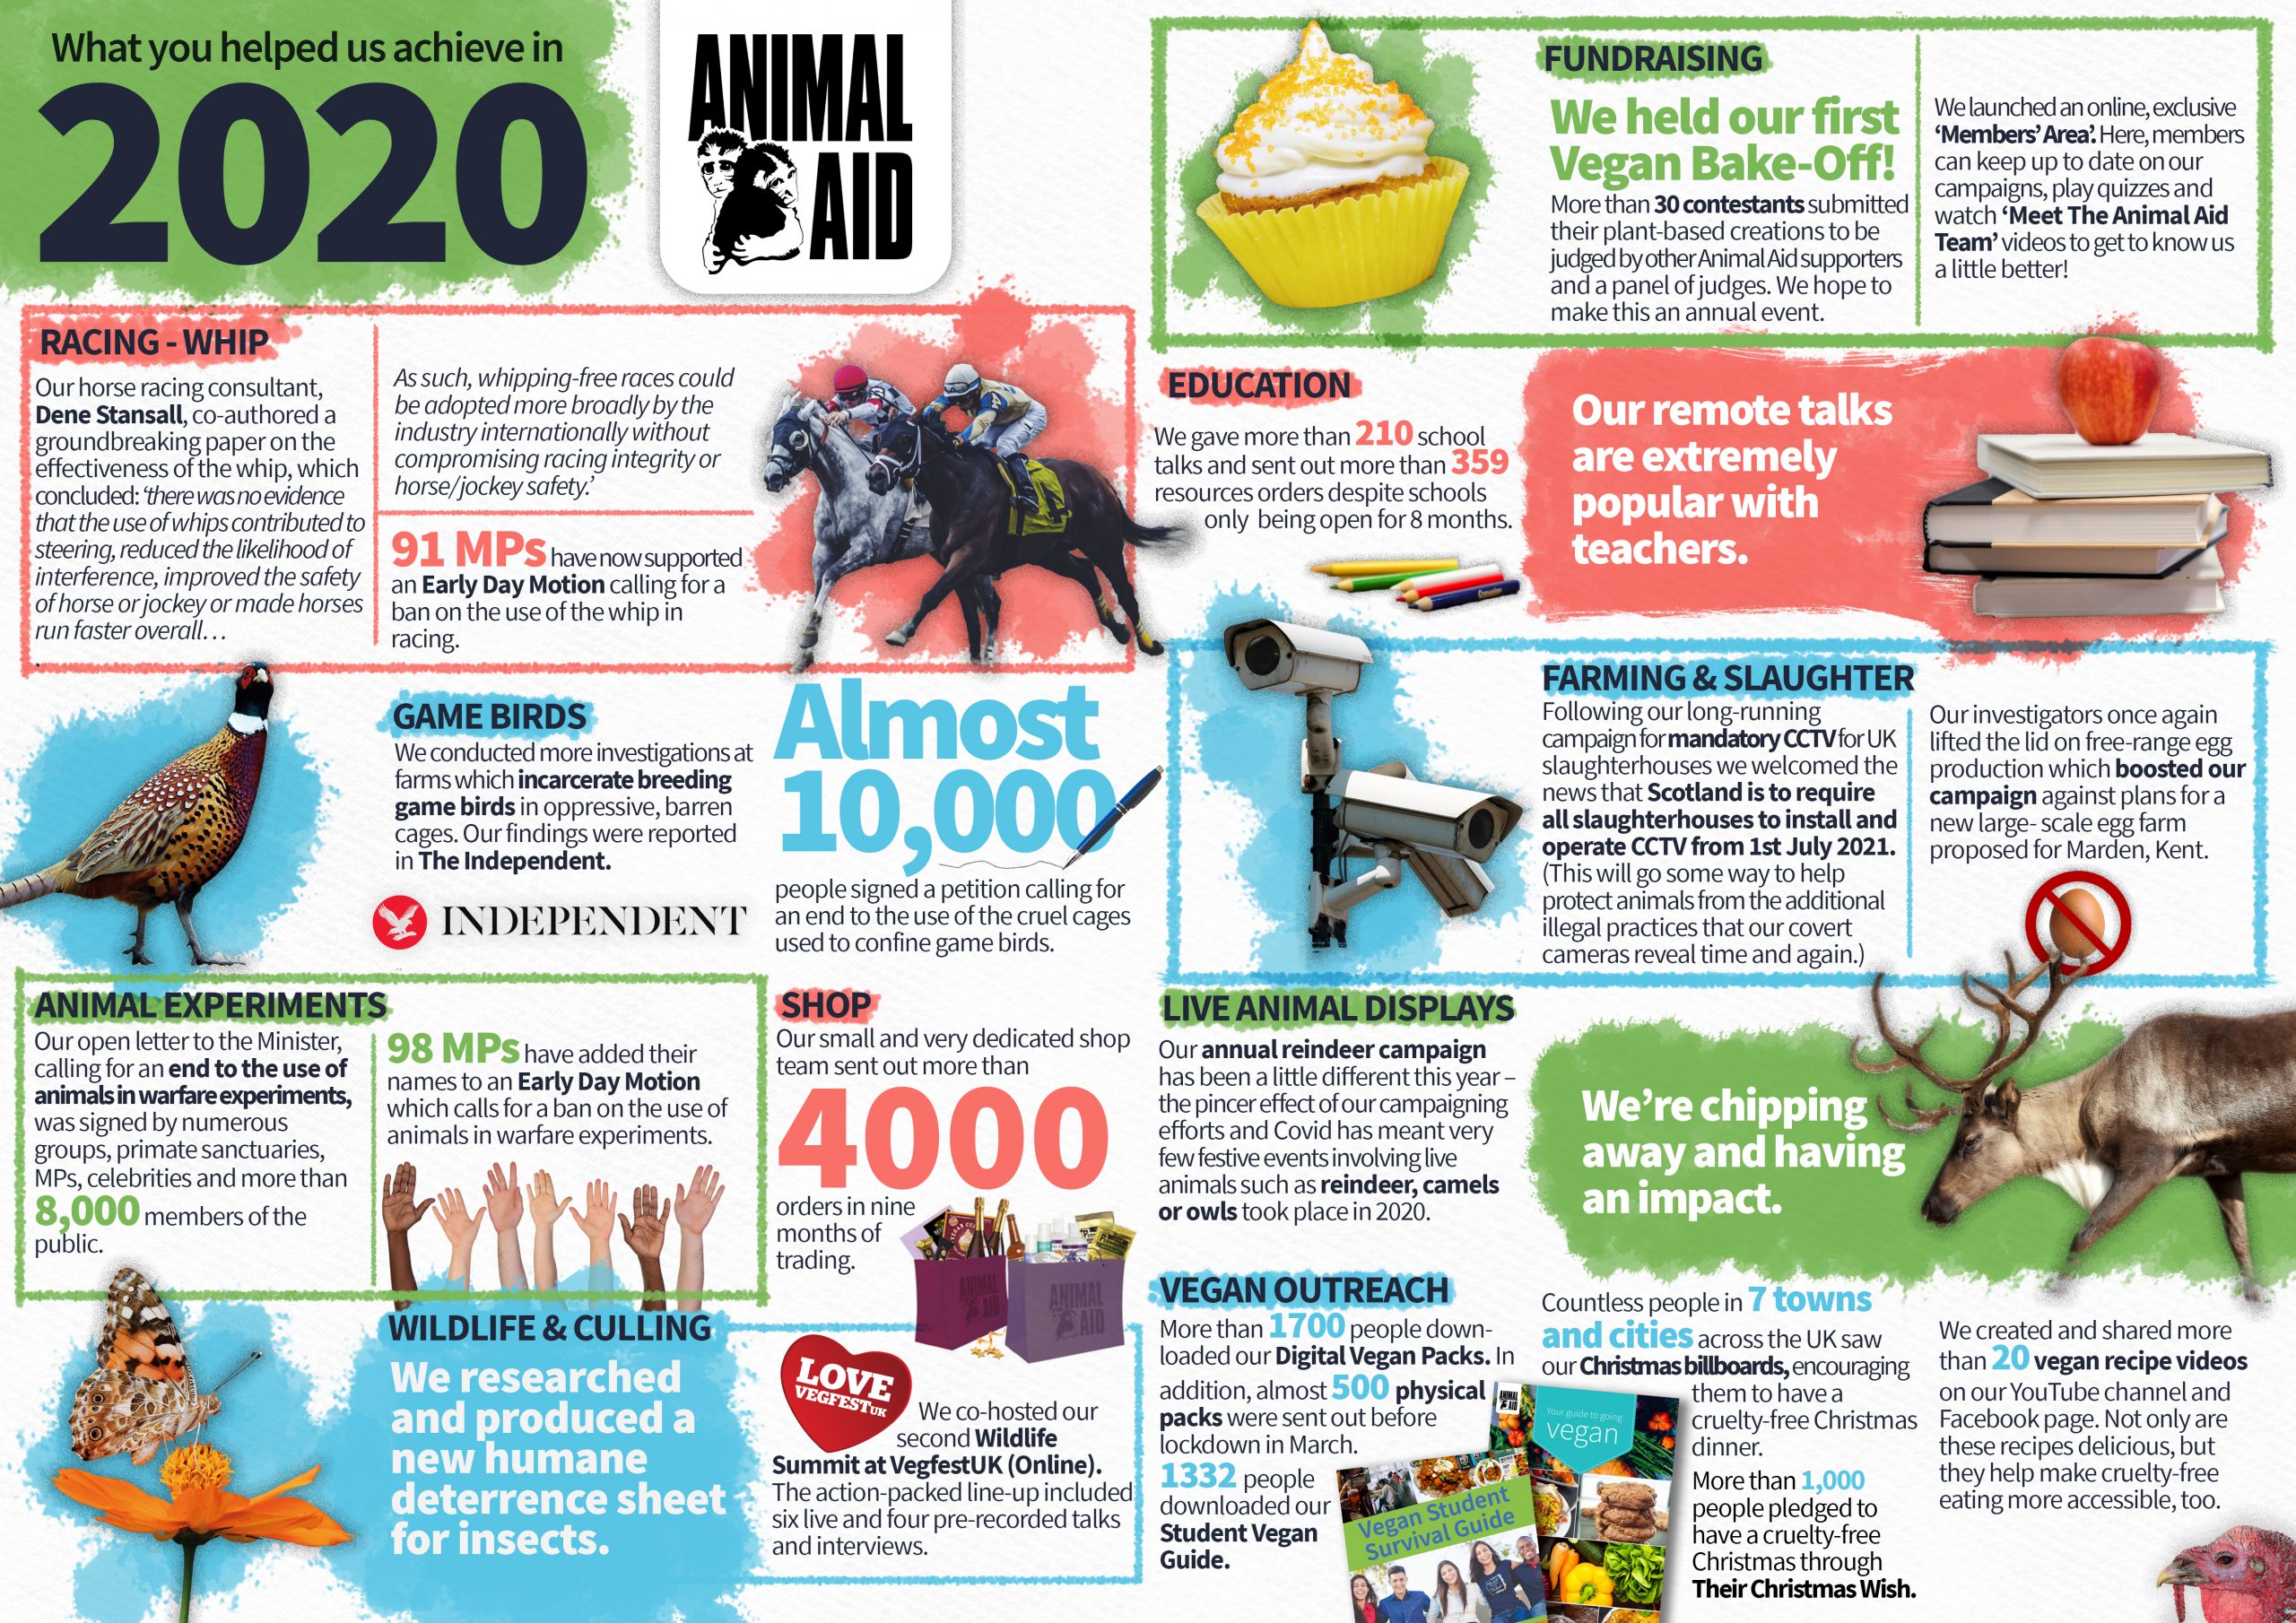 Our work in 2020 - Animal Aid